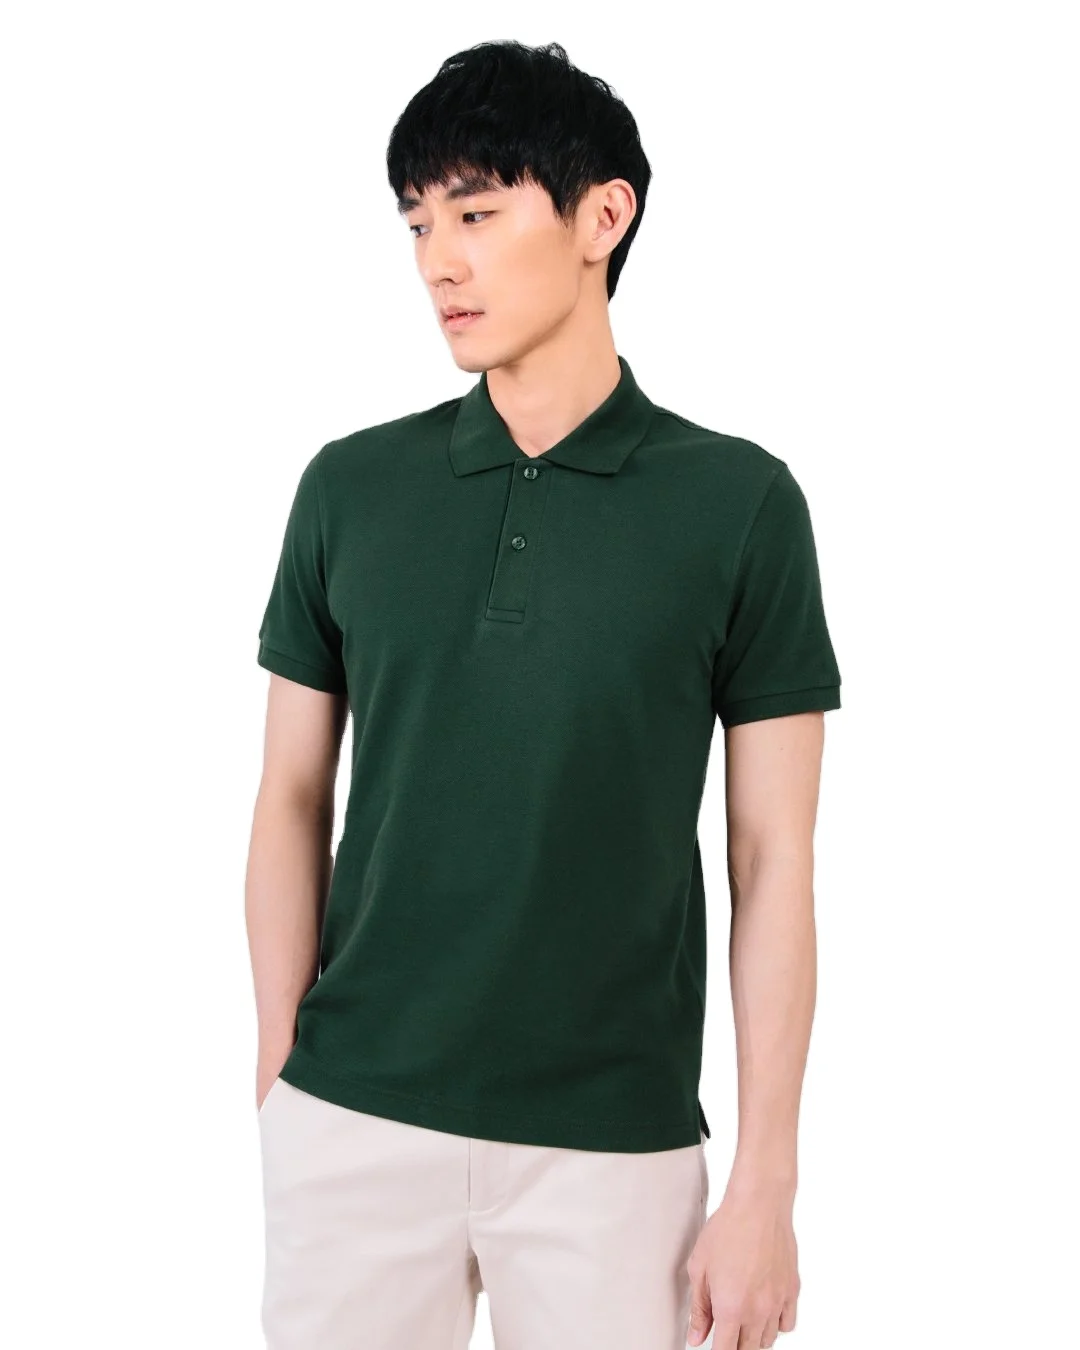 Green Bikkembergs Cotton Polo Shirt in Military Green Mens Clothing T-shirts Polo shirts for Men 